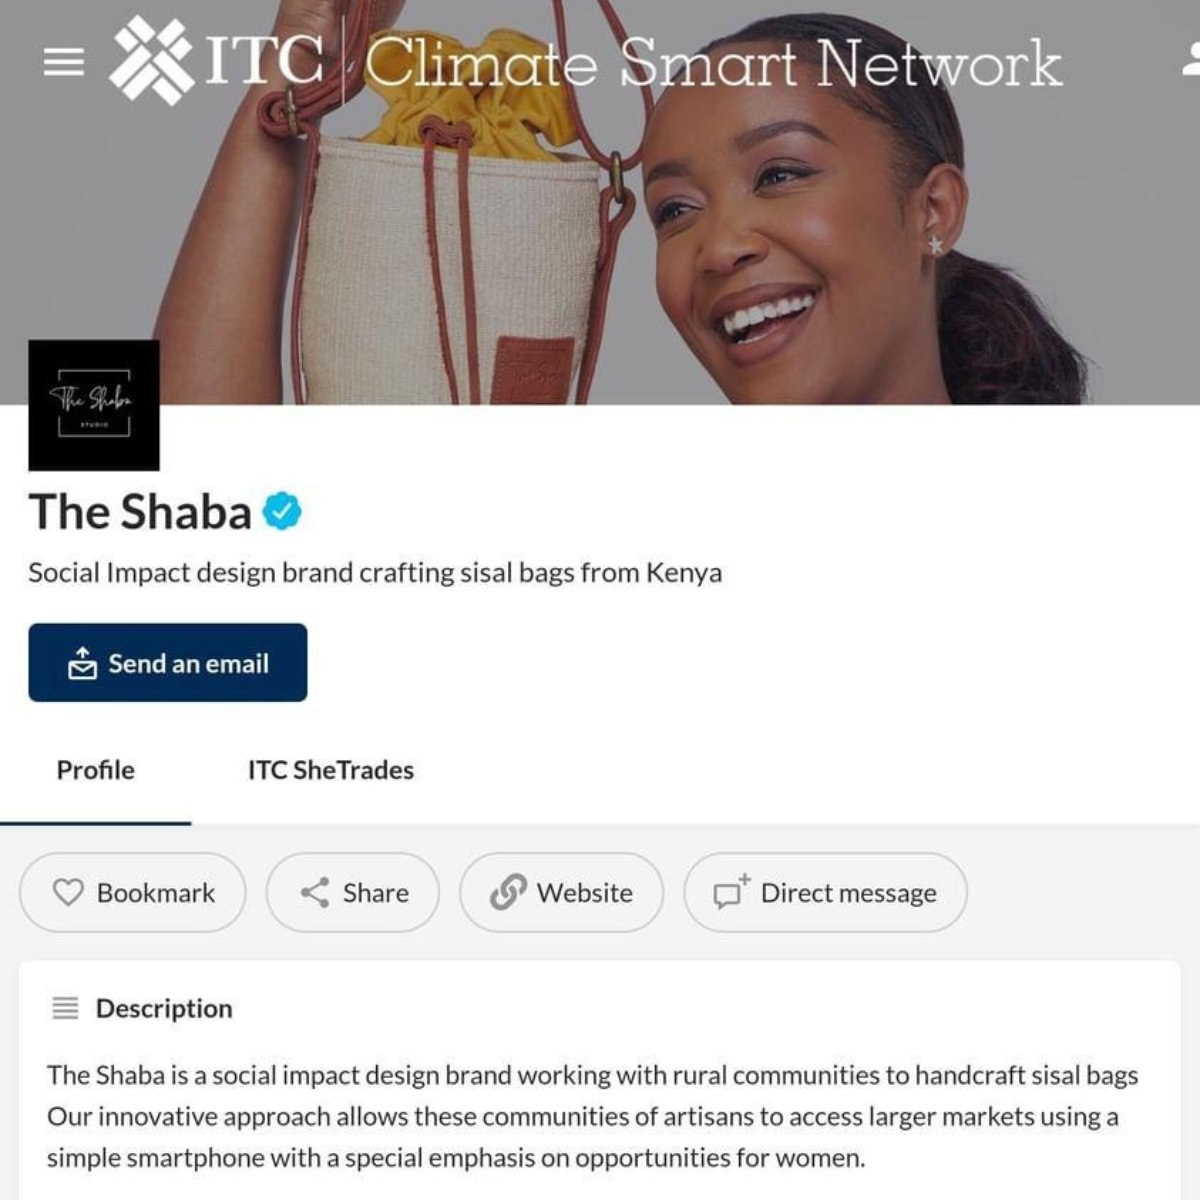 We are now Verified ✔️as a climate smart Business♻️ under the ITC Climate Smart Network. Click the link below : lnkd.in/dVd-6QdQ #climatesmartnetwork #theshaba #shetrades #ITCshetrades #madeinkenya #climate #sustainability #sustainableinnovations #socialimpact